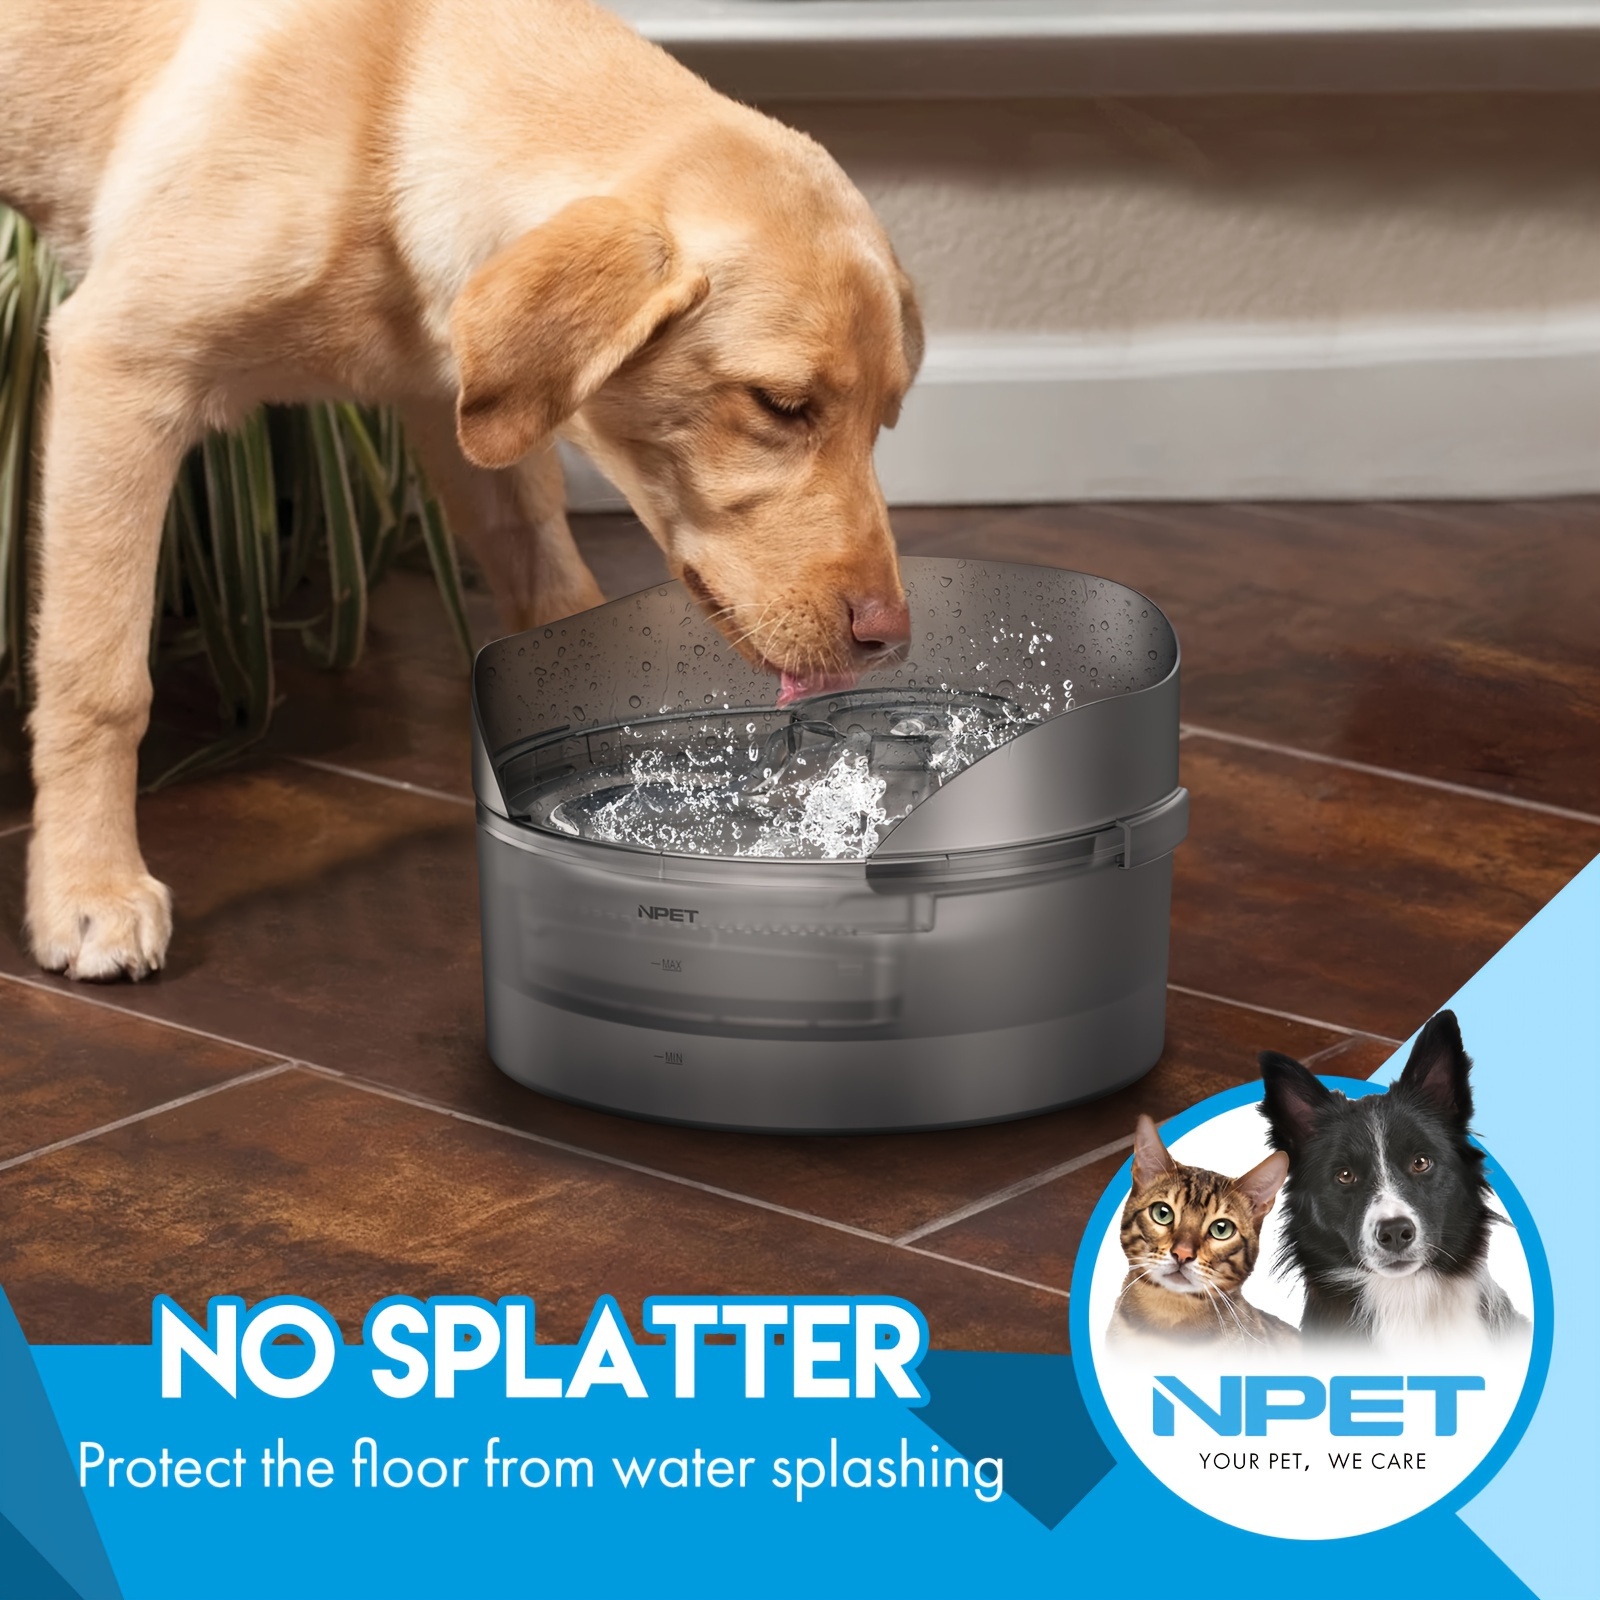 

Npet Dog Water Fountain, 1.3 Gallon/170oz/5l Large Automatic Dog Water Bowl Dispenser, Pet Water Fountain With Splatter Guard, Cleaning Kit For Dogs, Multiple Pets